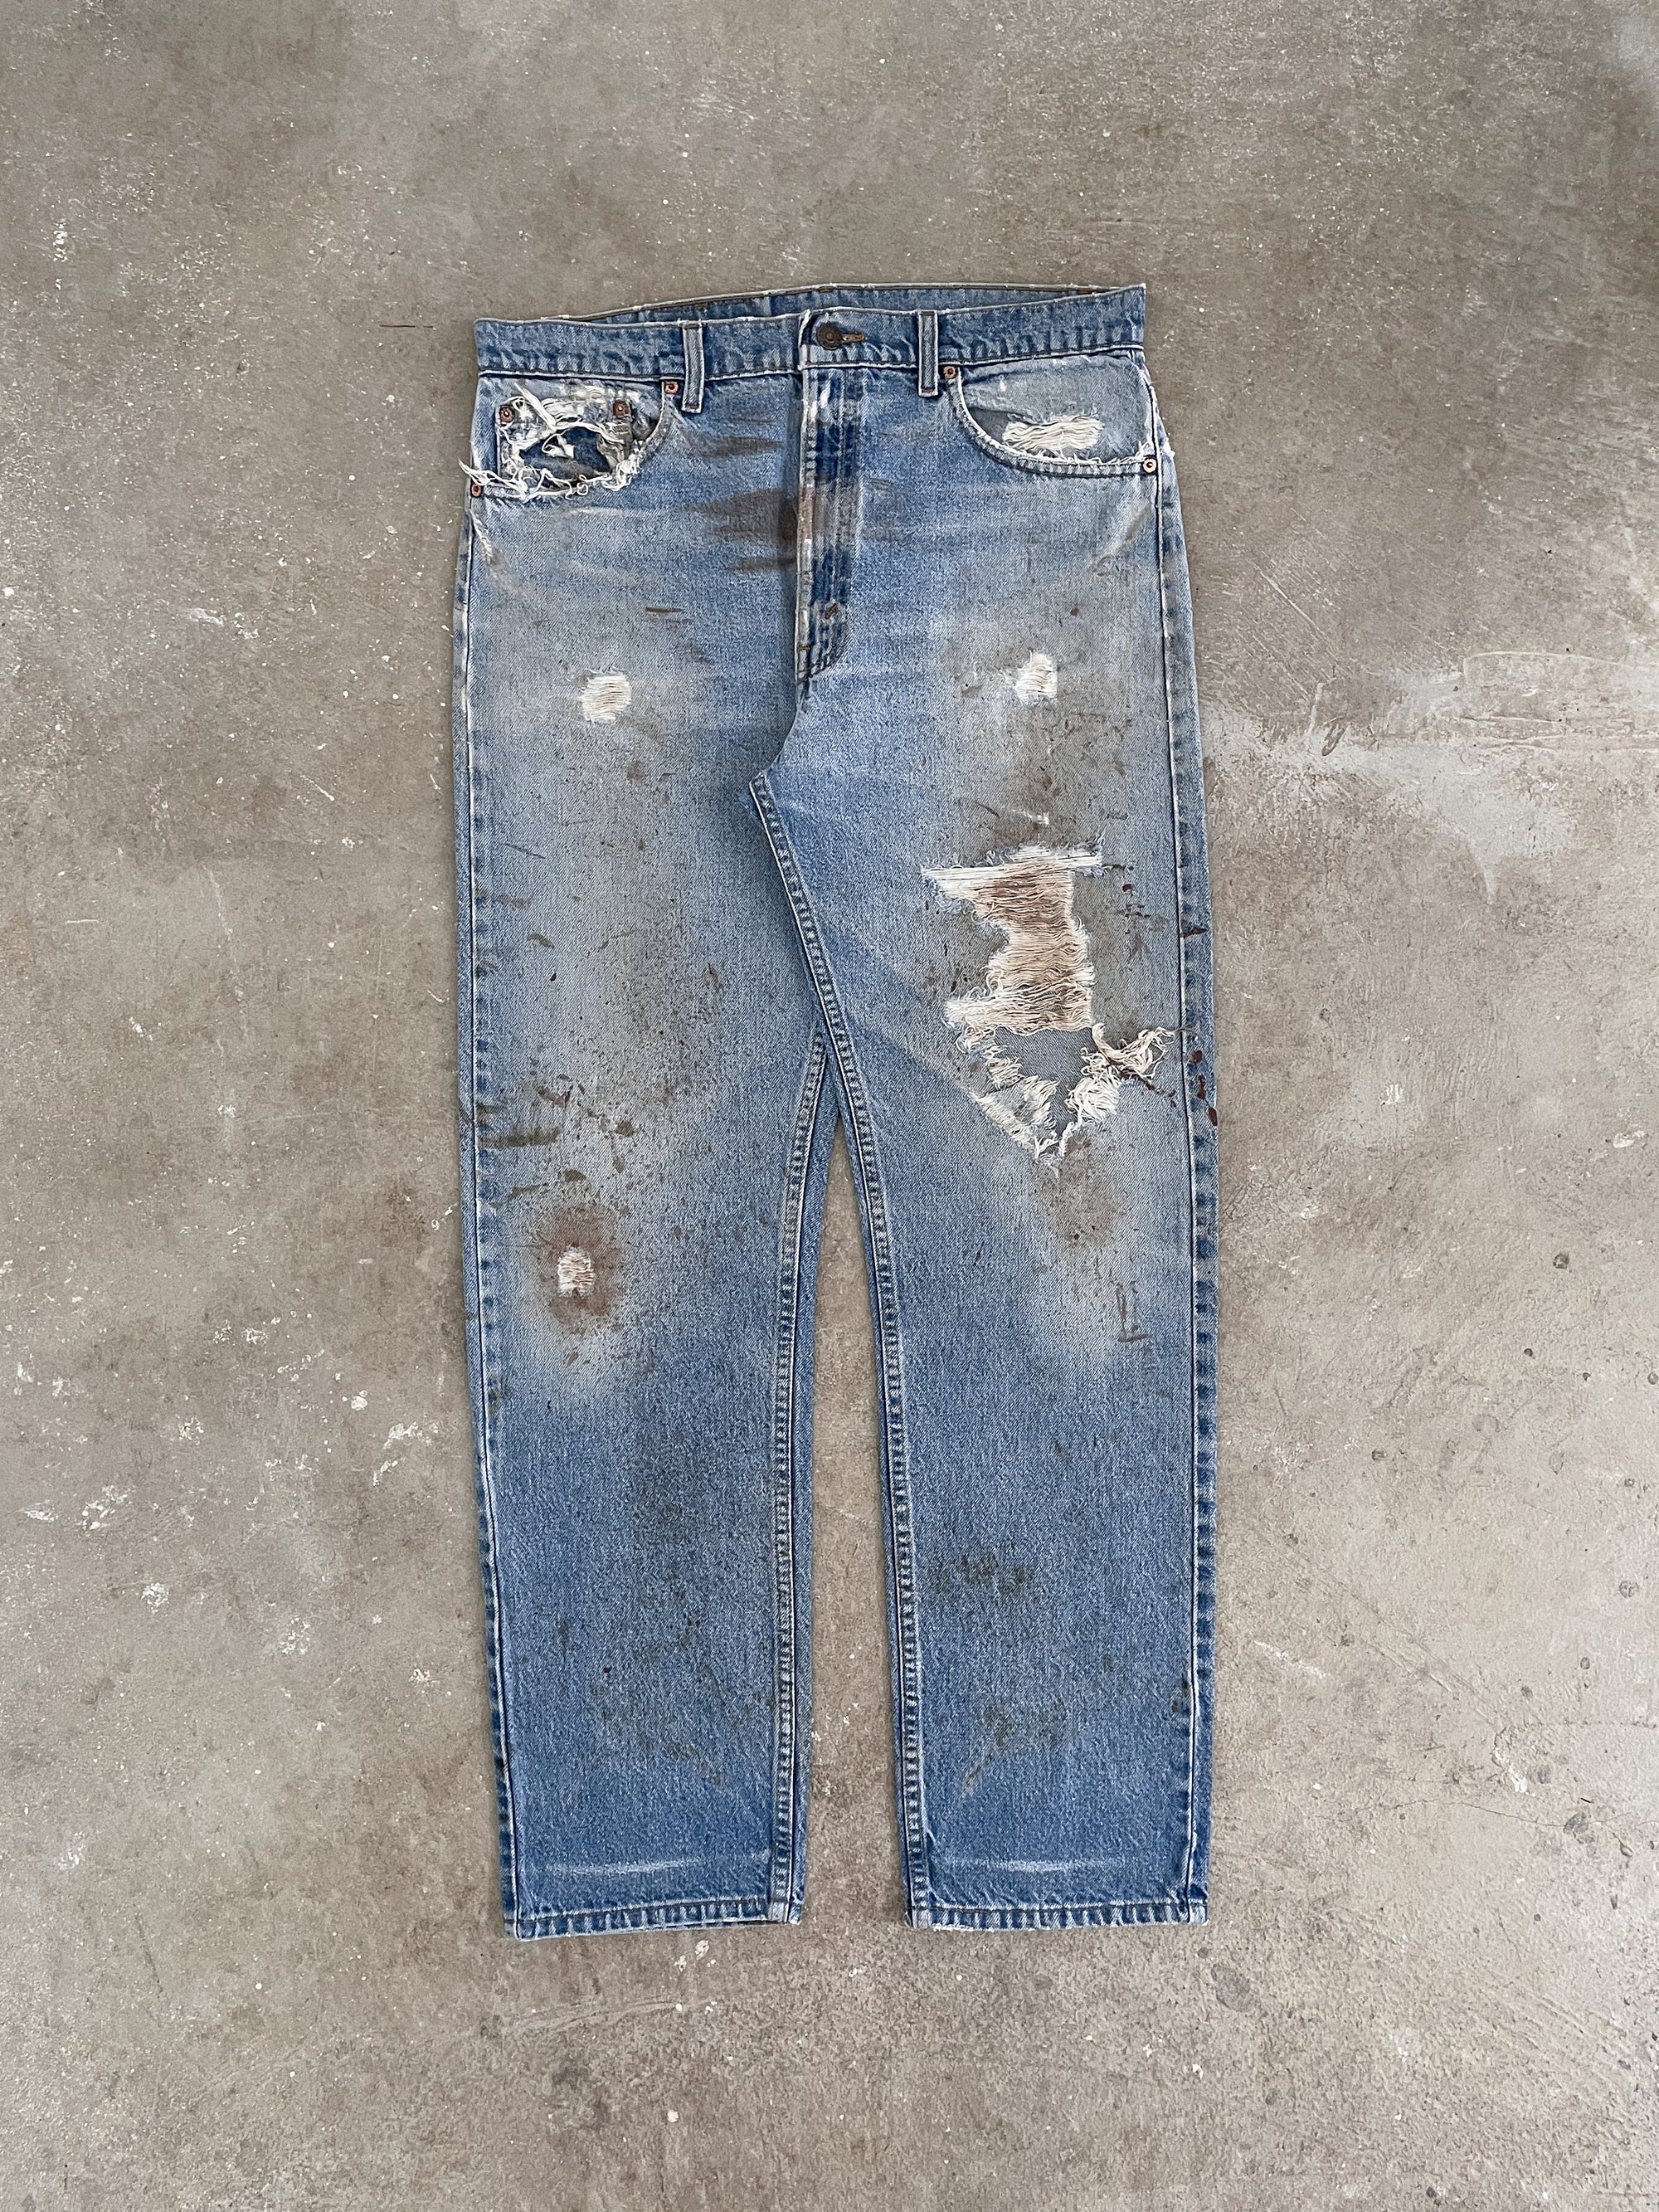 1980s Levi’s Distressed Worn In Blue 505 (34X31)